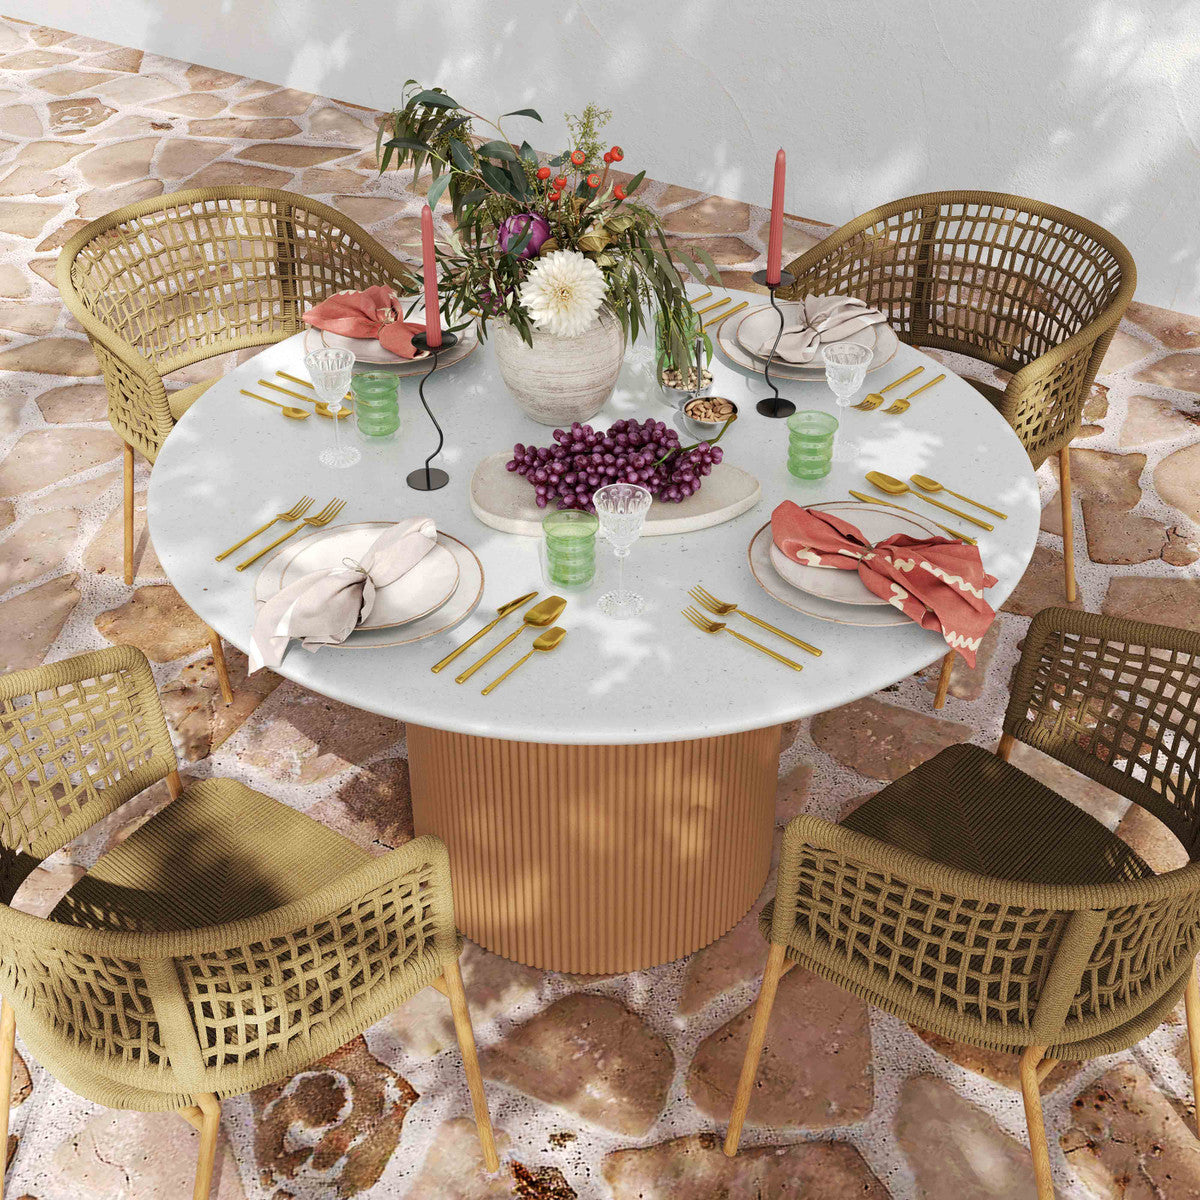 Rose Faux Terrazzo and Terracotta Indoor / Outdoor Round Concrete Dining Table